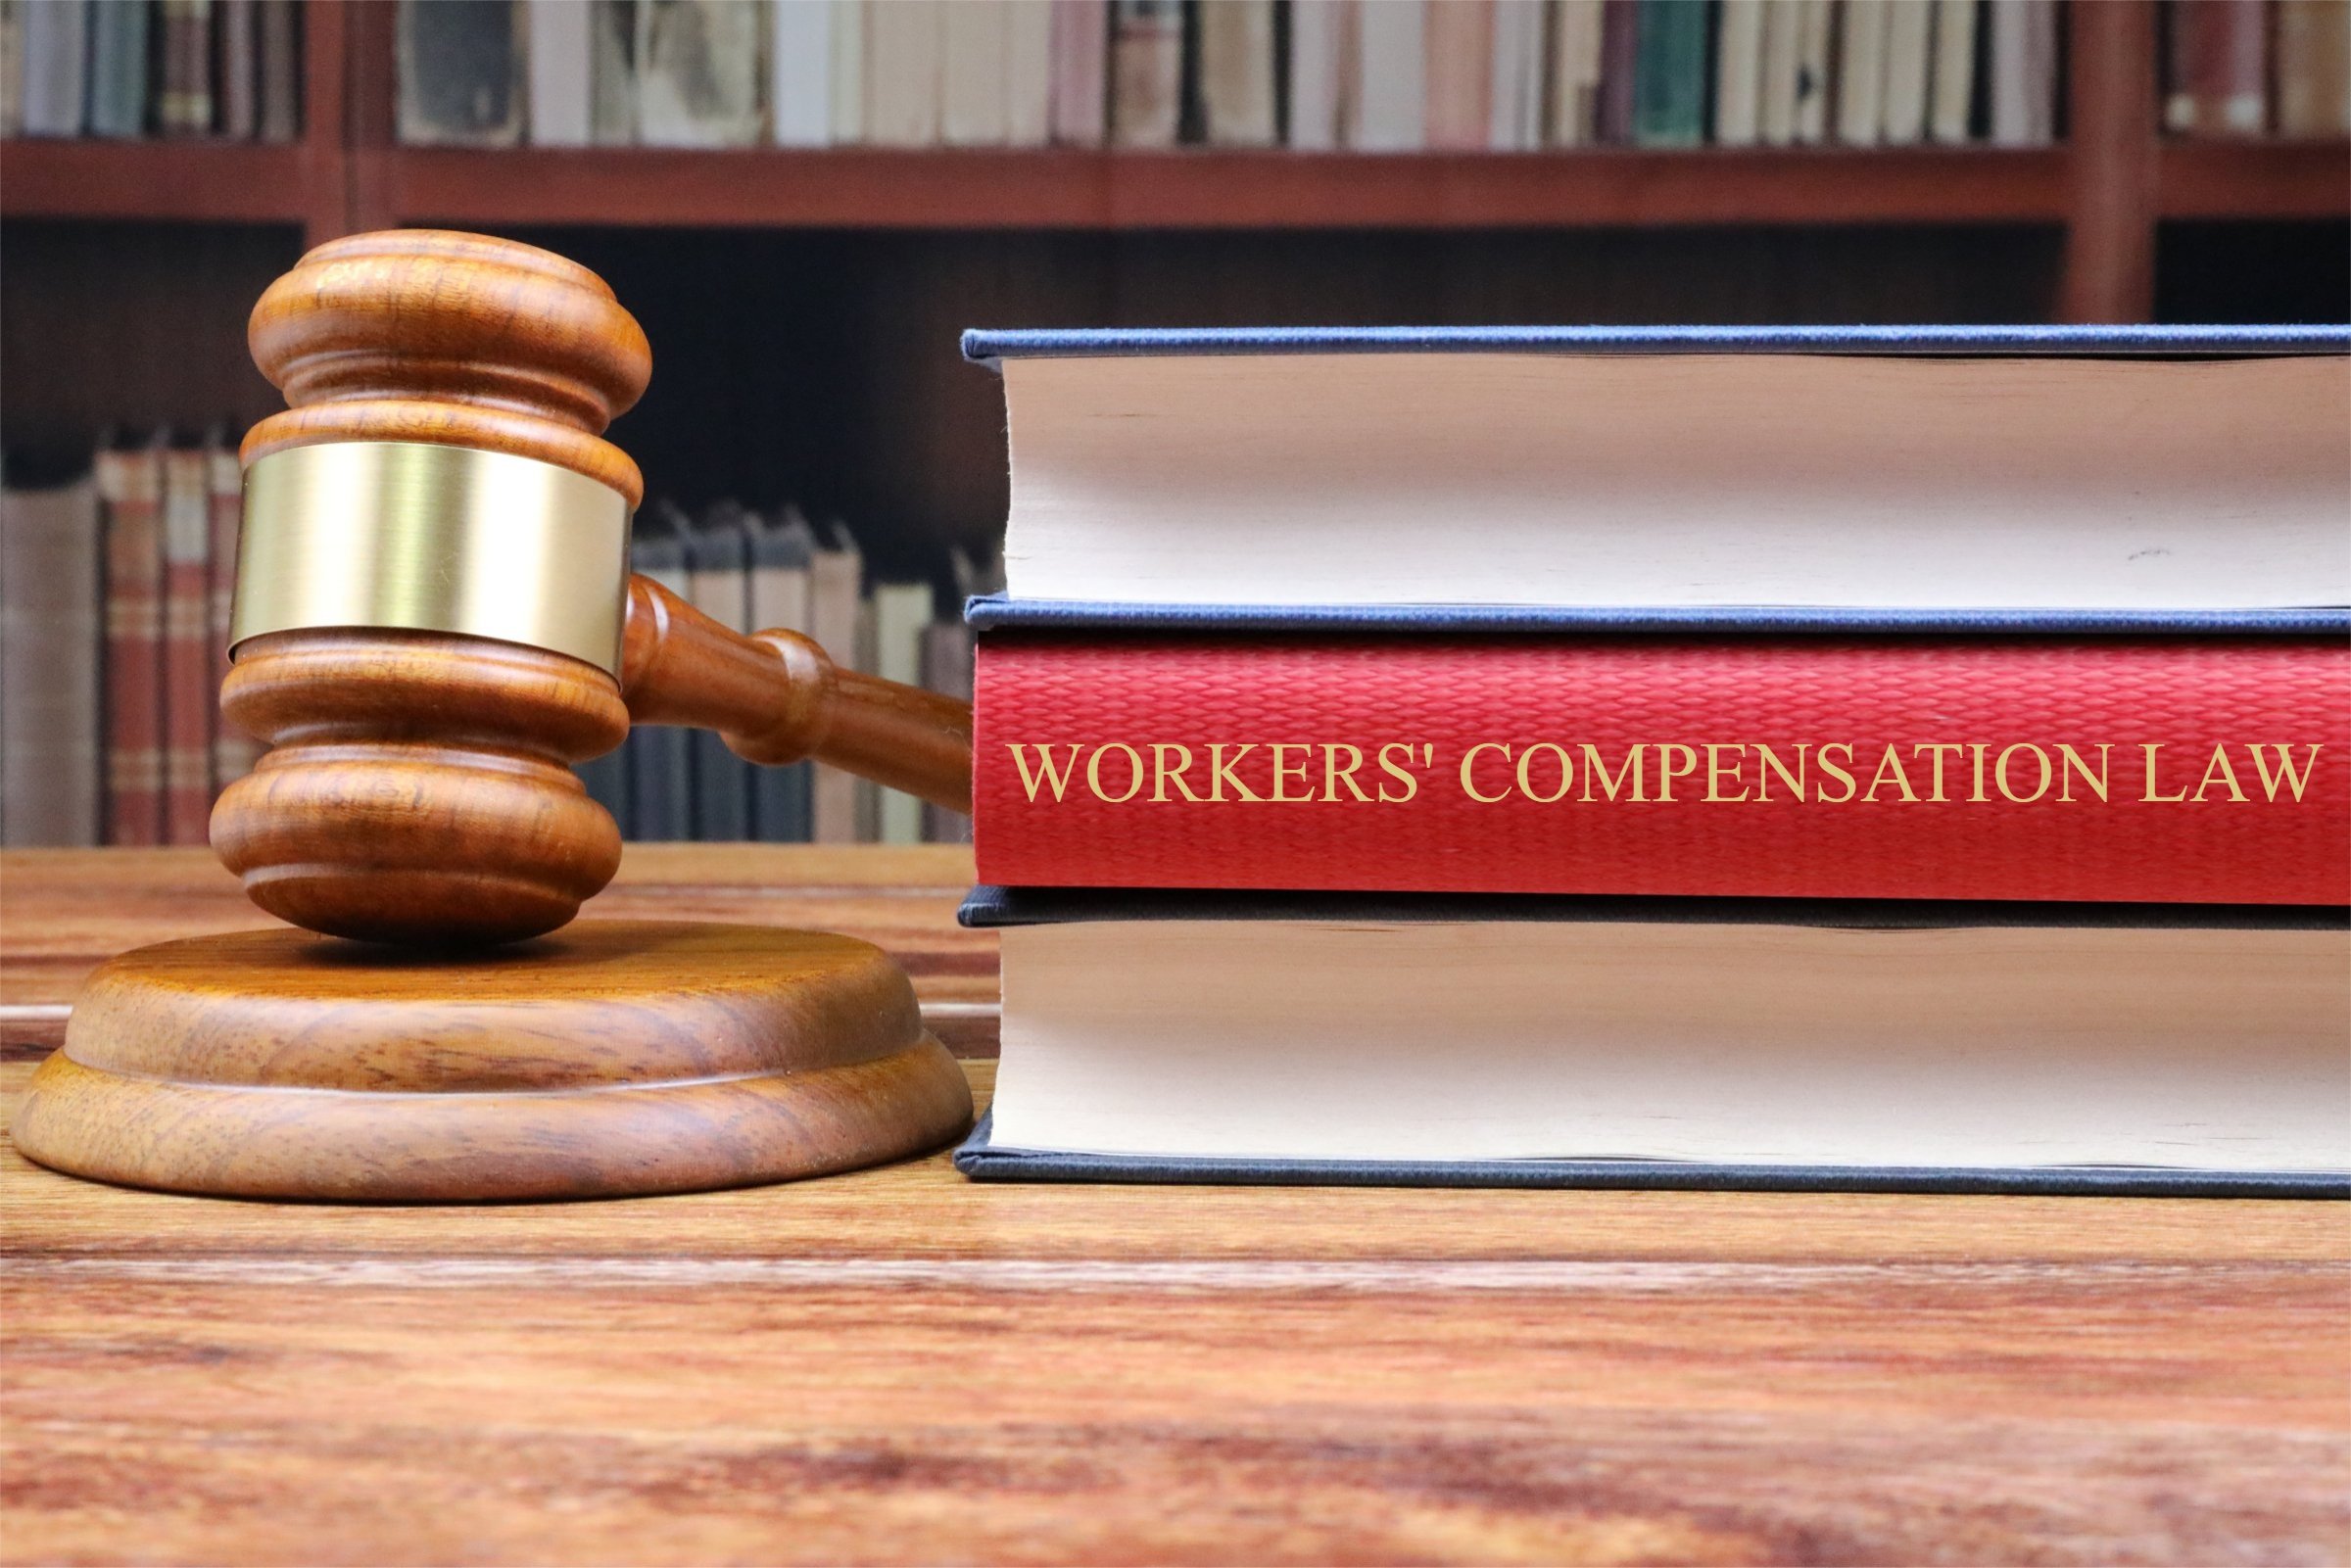 workers compensation law